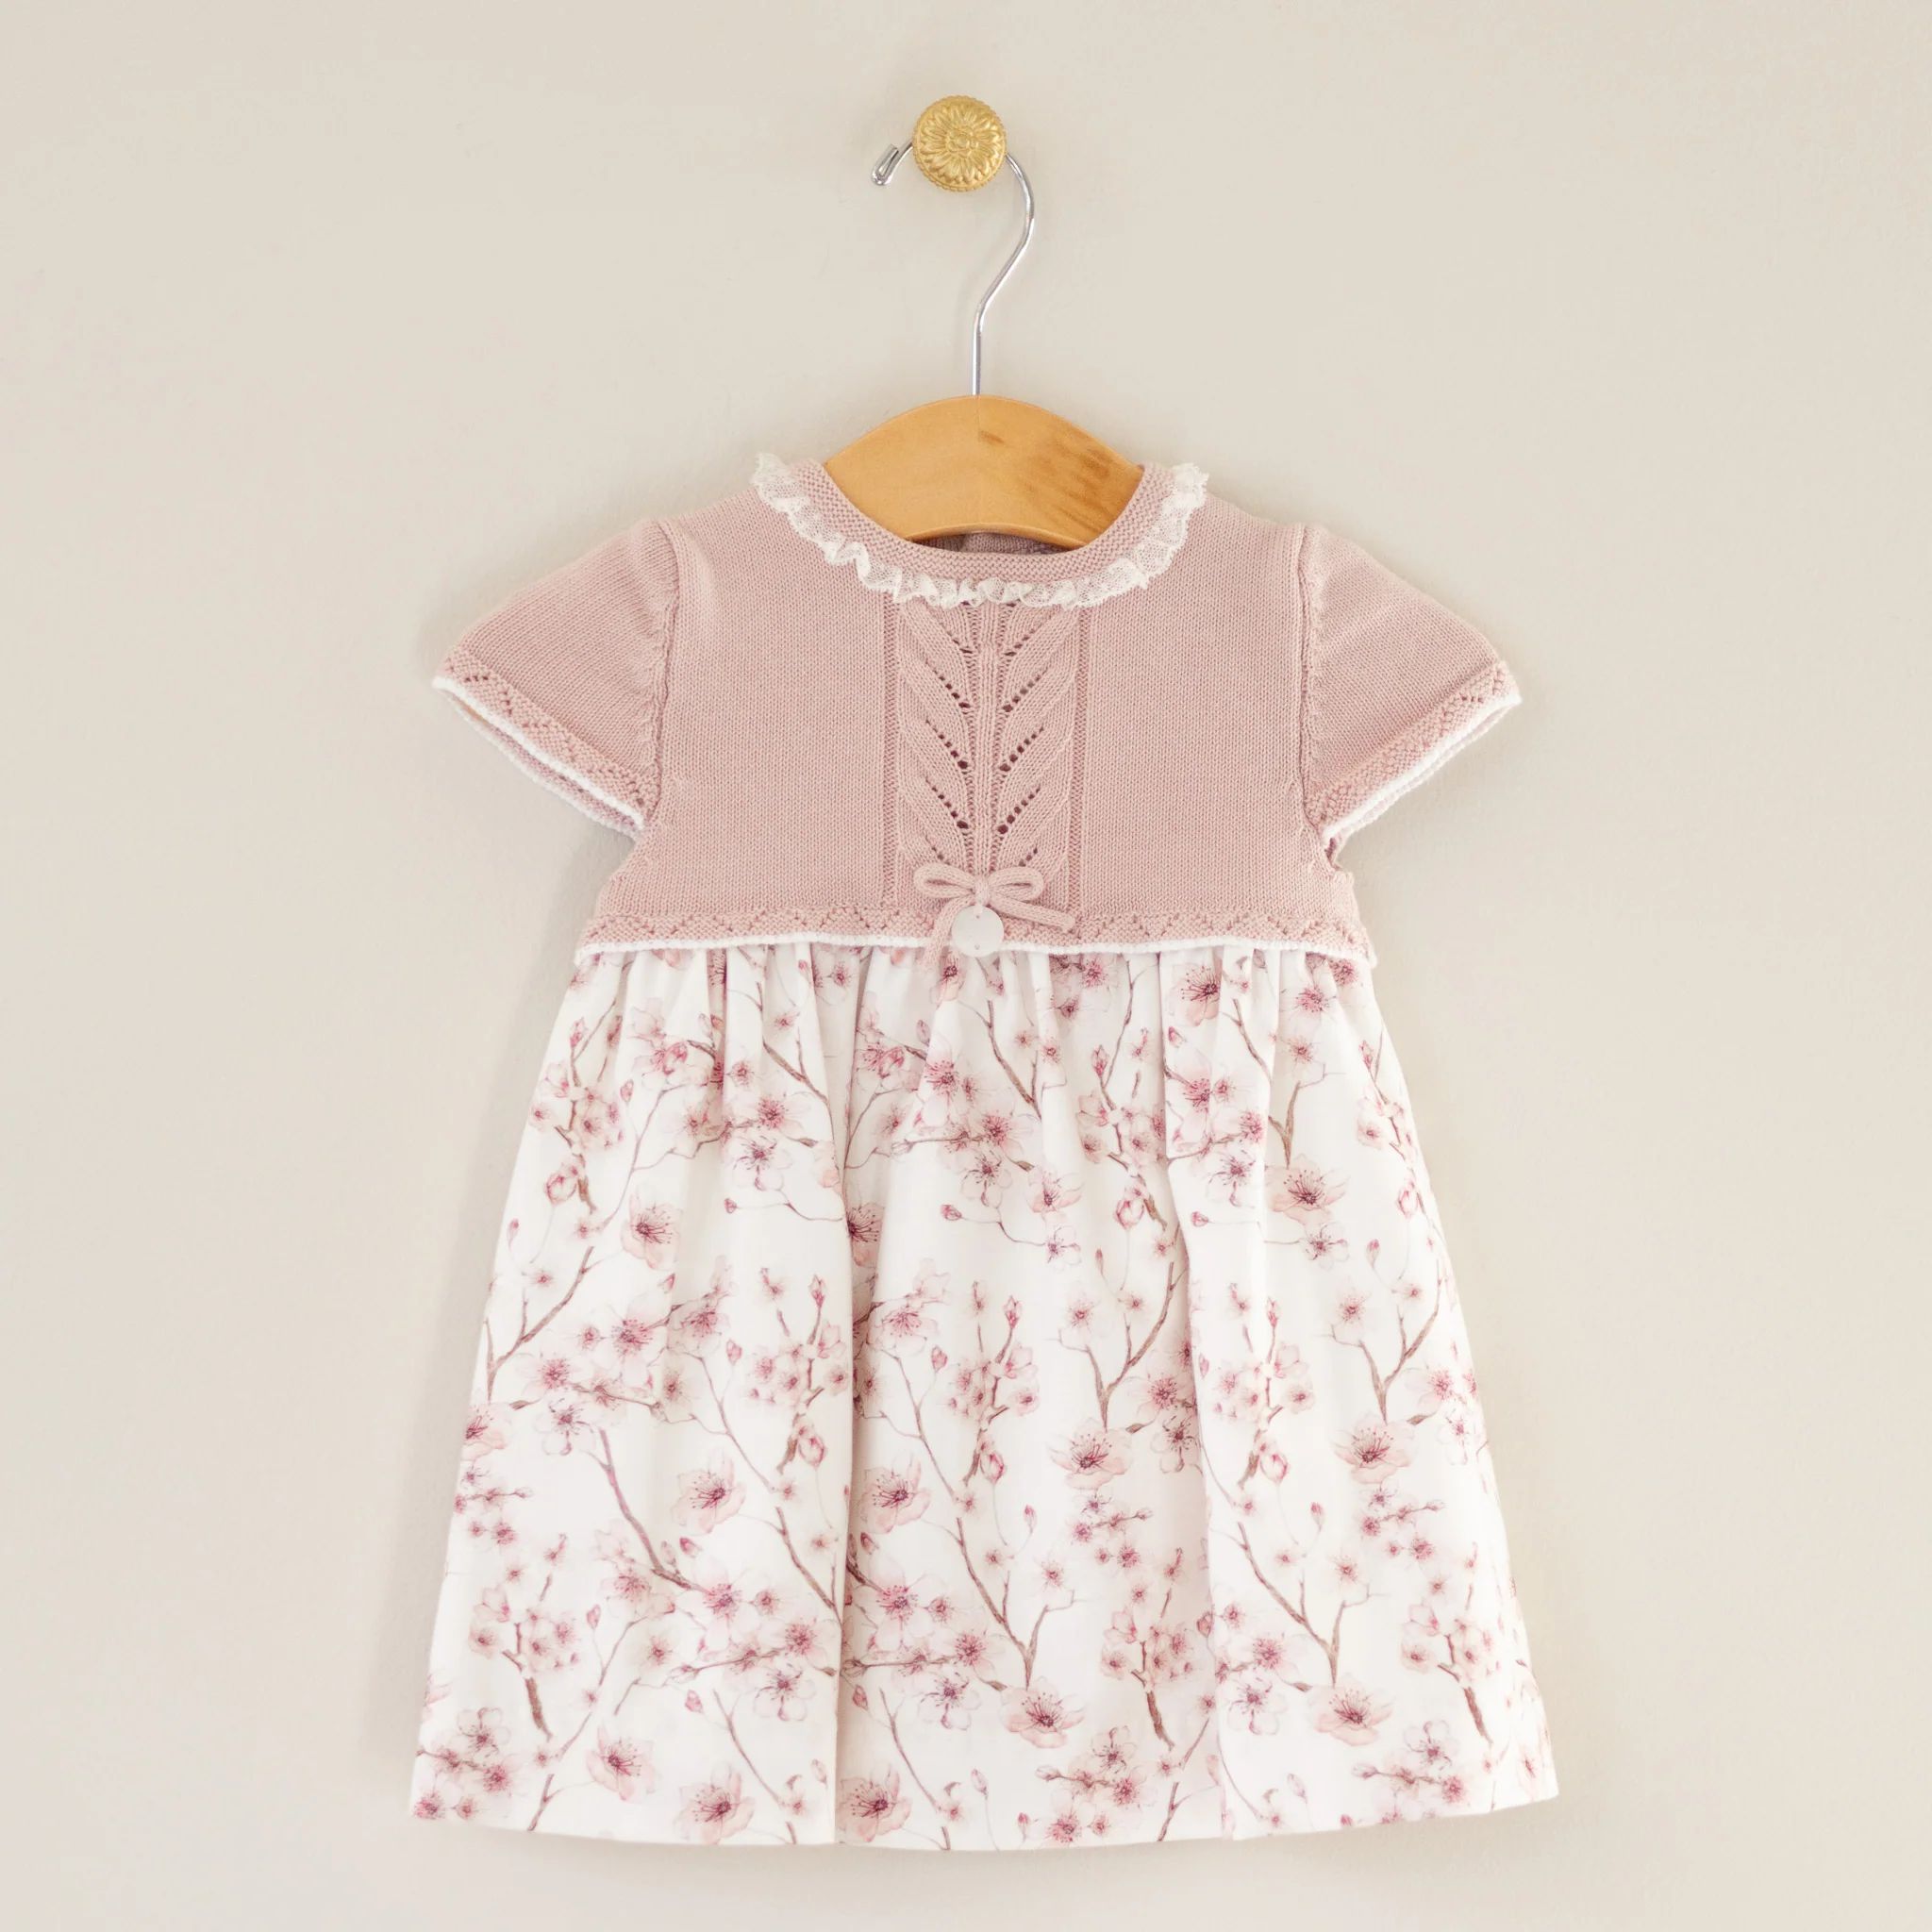 Rose Knit Dress with Cherry Blossom Print | Four and Twenty Sailors